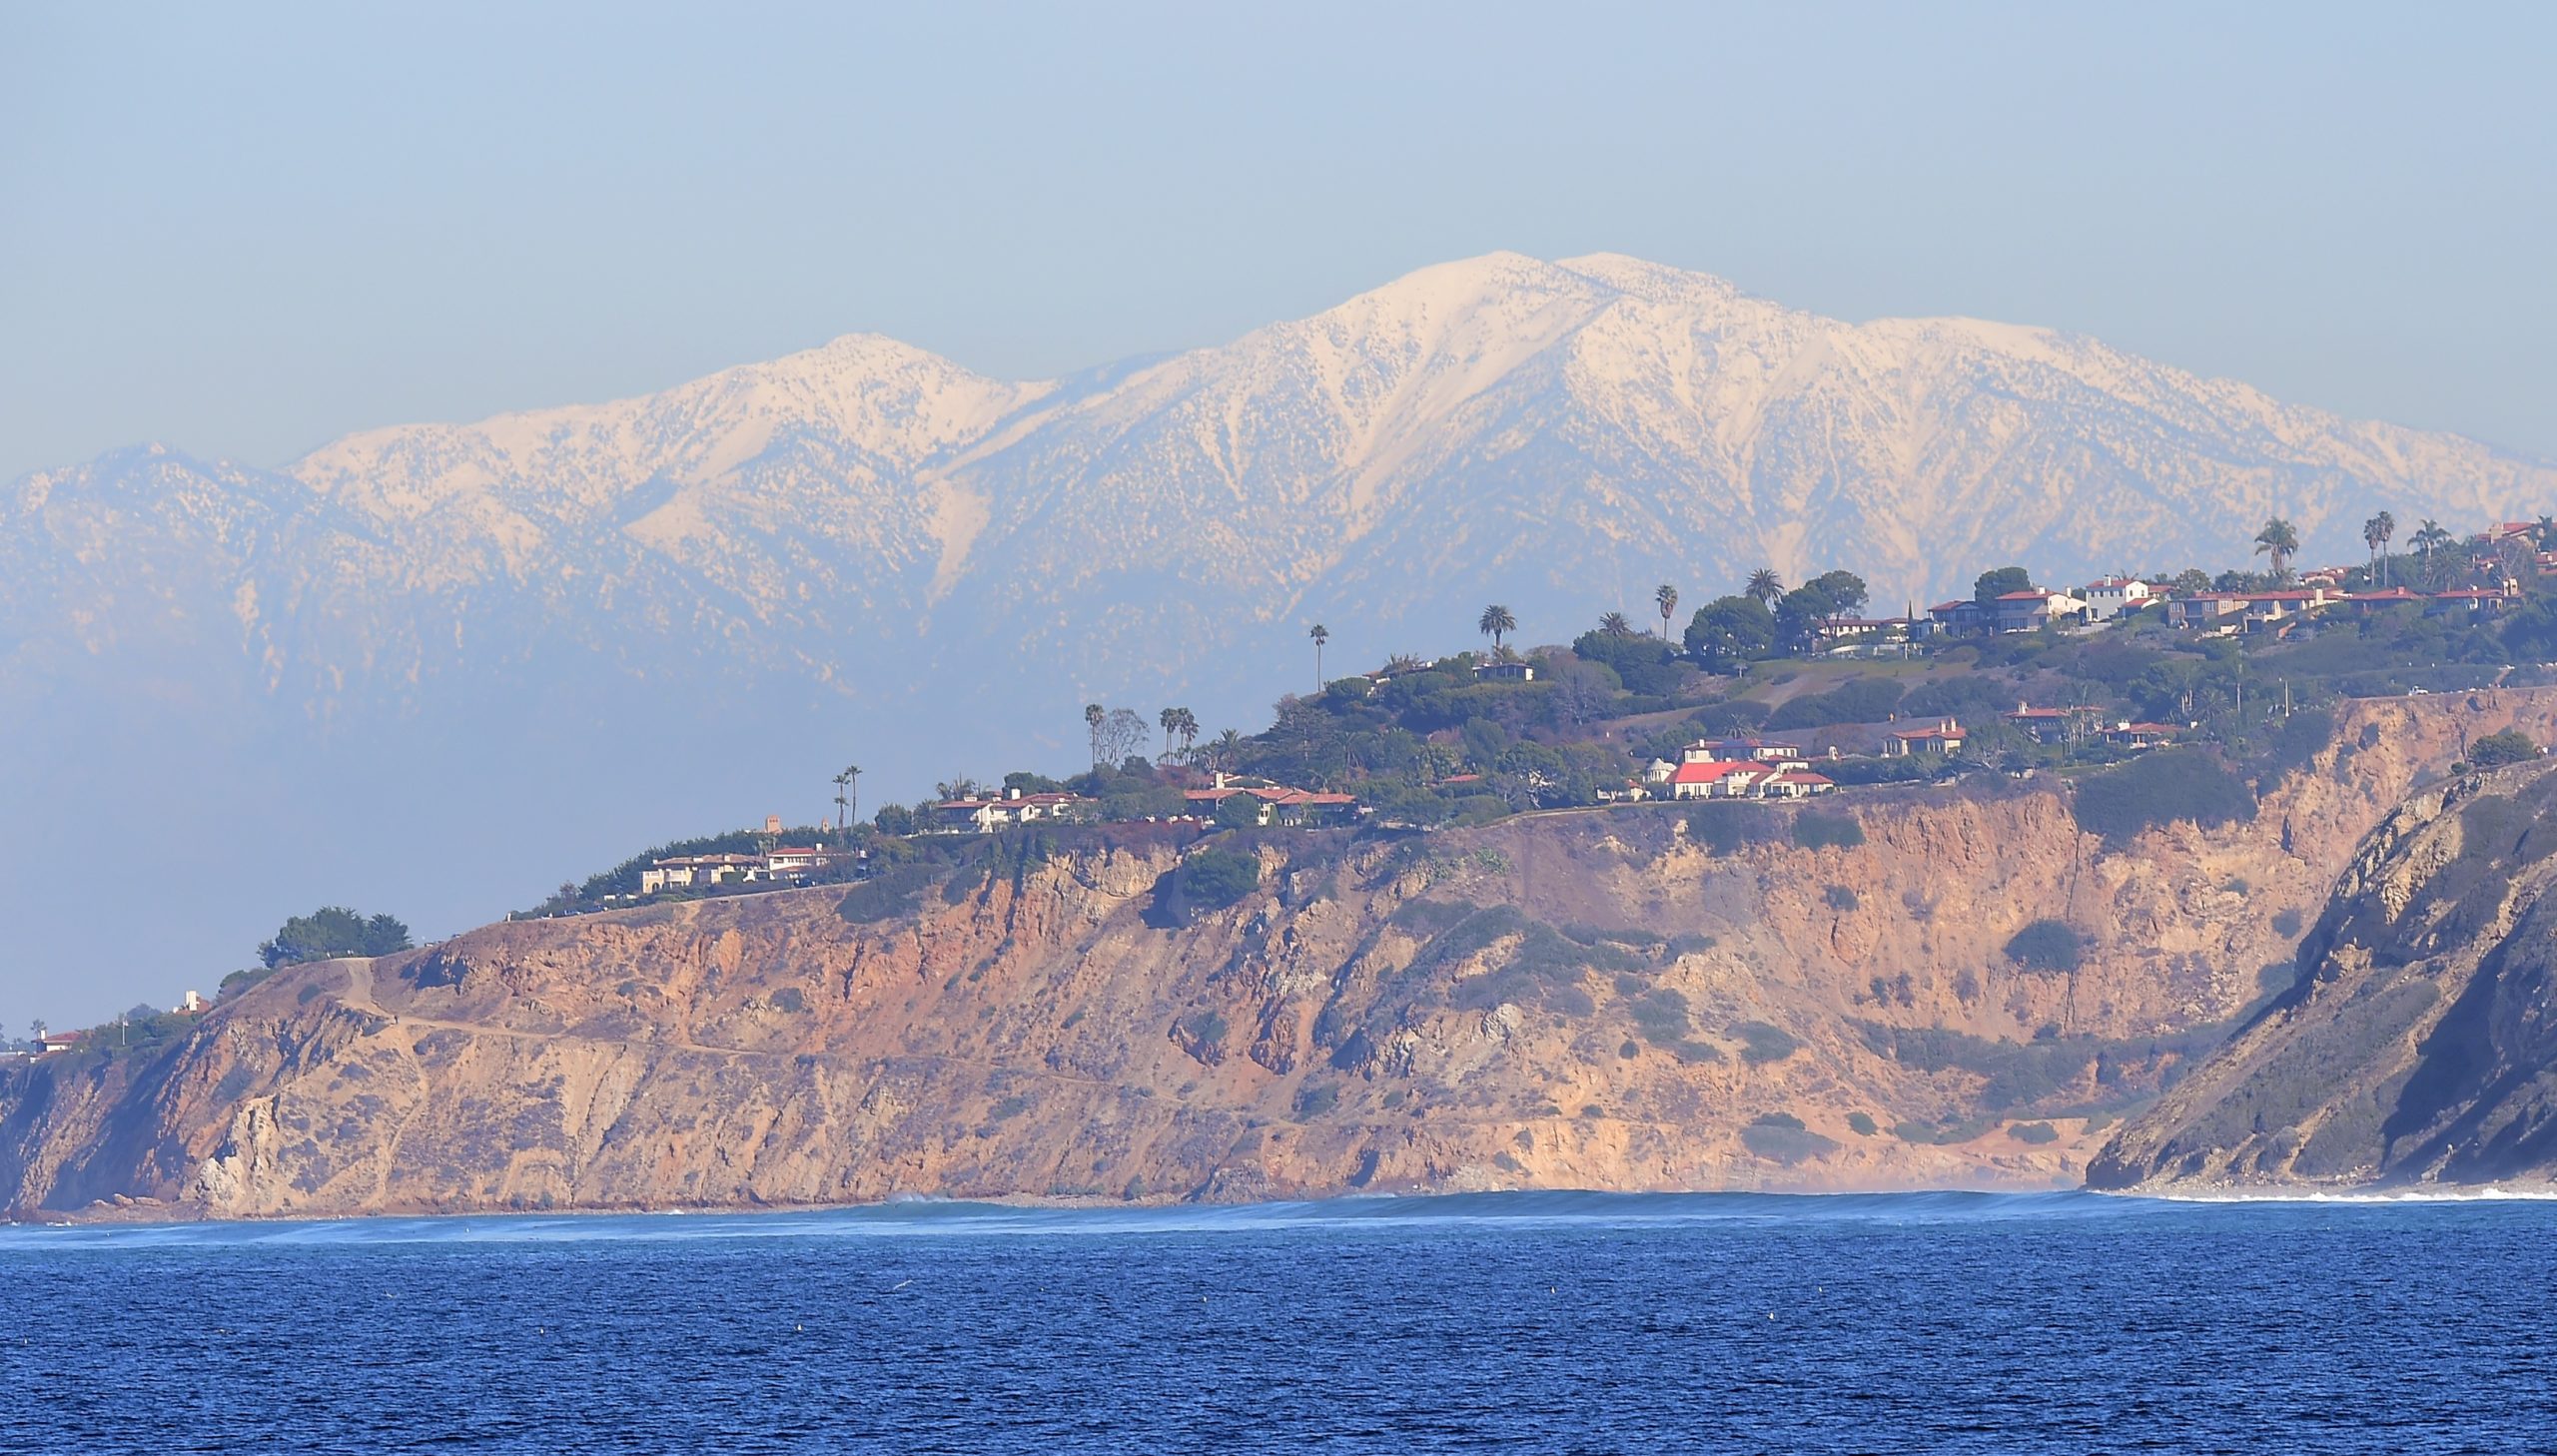 The snow-capped peaks of the San Gabriel Mountains can be seen in the distance from the affluent community of Rancho Palos Verdes on January 12, 2016, where cliffs hug the coastline with hilltop homes offering ocean views of the Pacific Ocean, south of Los Angeles. (Photo: FREDERIC J BROWN/AFP via Getty Images)